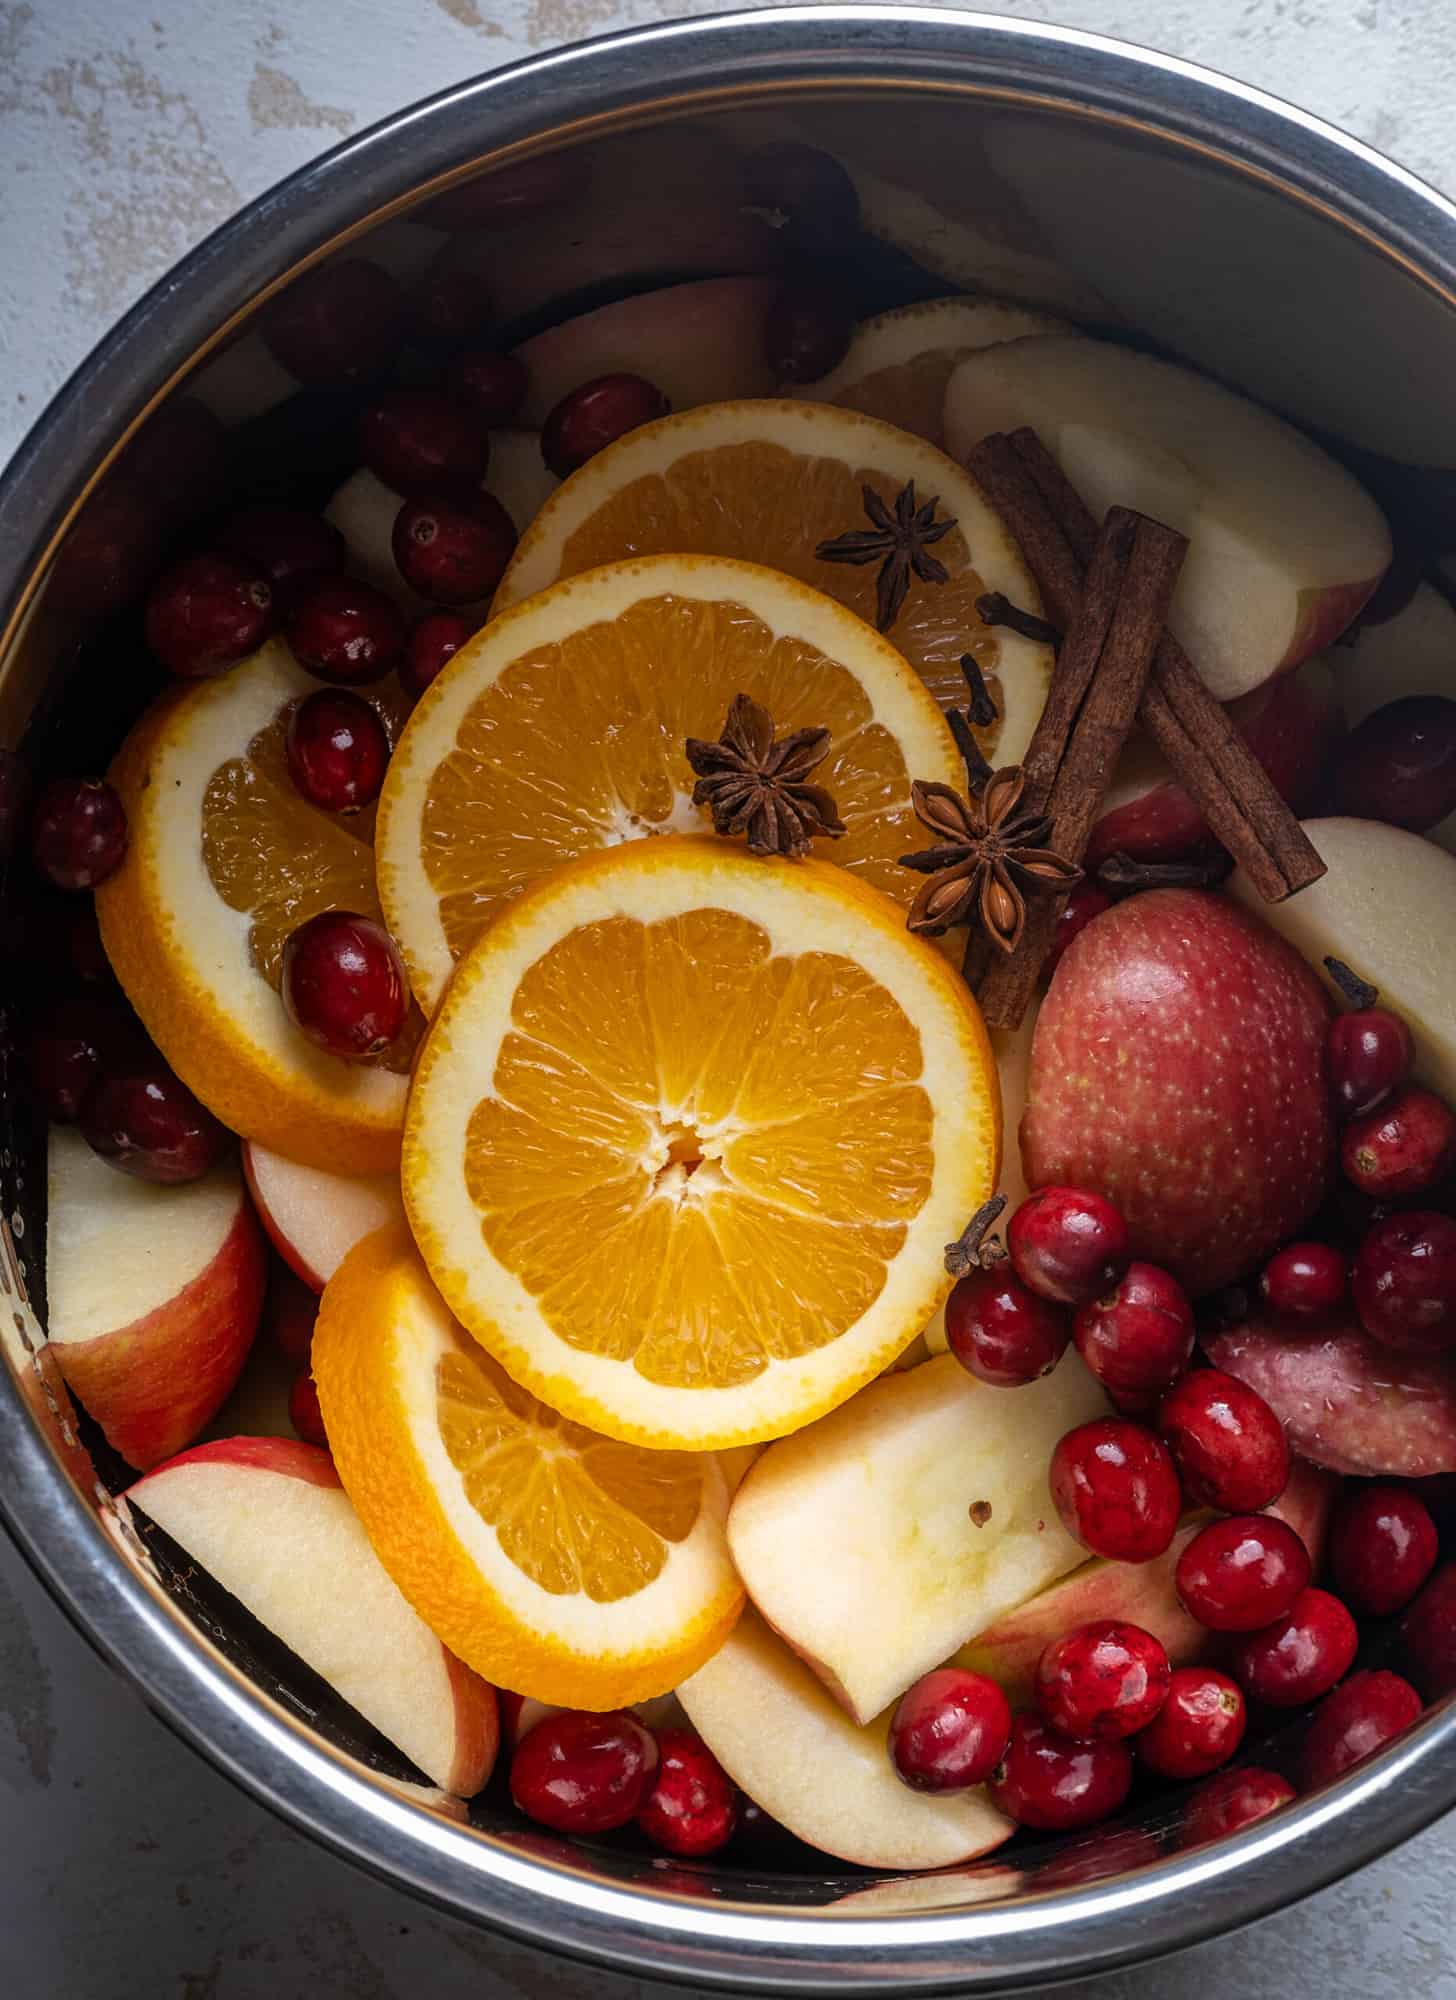 the ingredients to make apple cider in an instant pot.